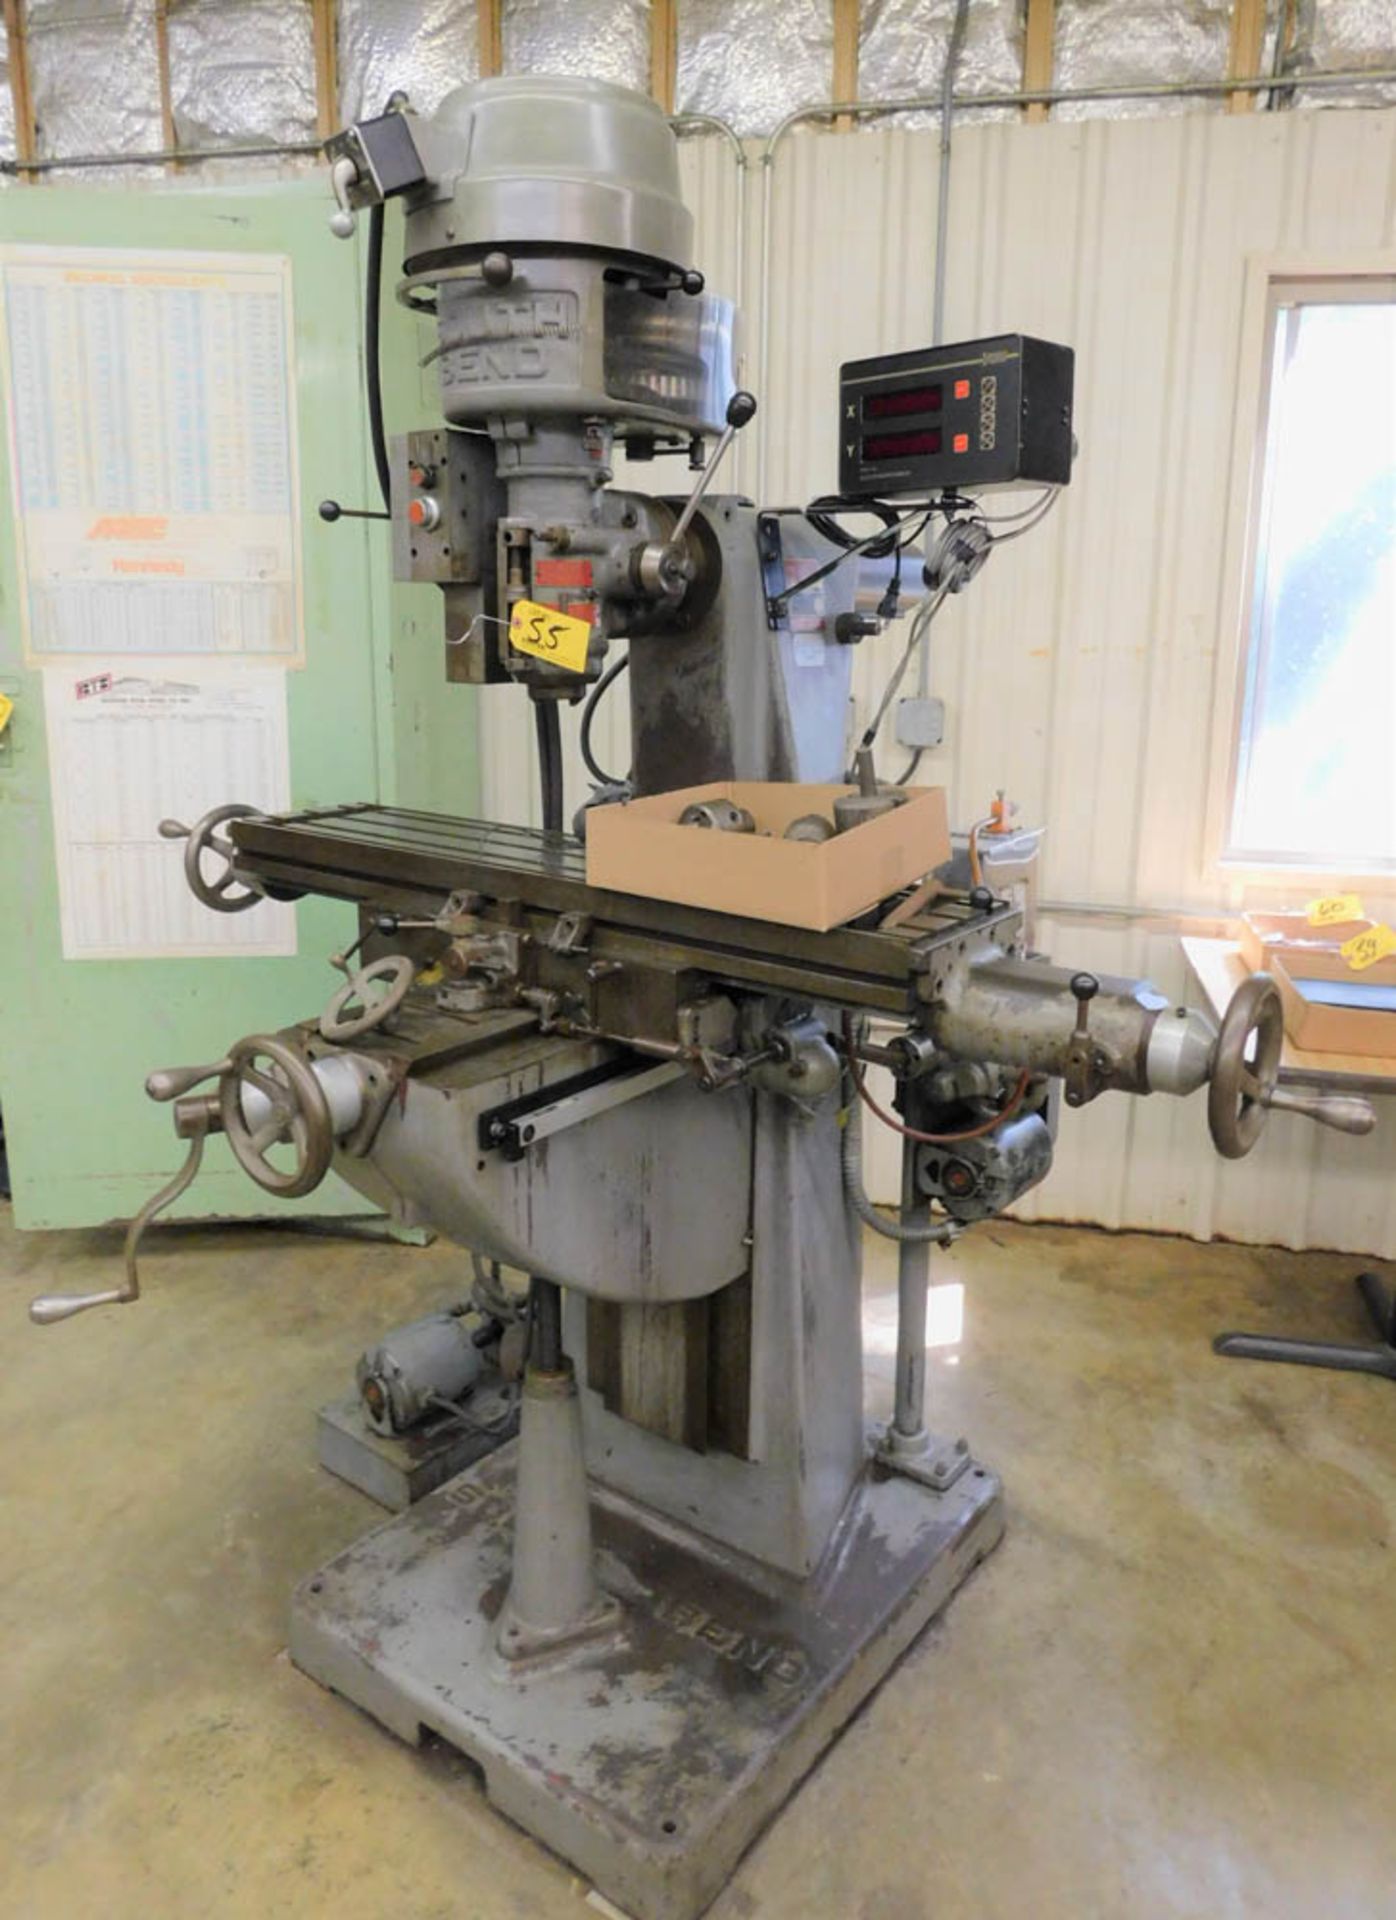 SOUTH BEND KNEE TYPE VERTICAL MILLING MACHINE CAT NO# MIL4218, 135-3750RPM, SARGON 2-AXIS DIGITAL - Image 2 of 4